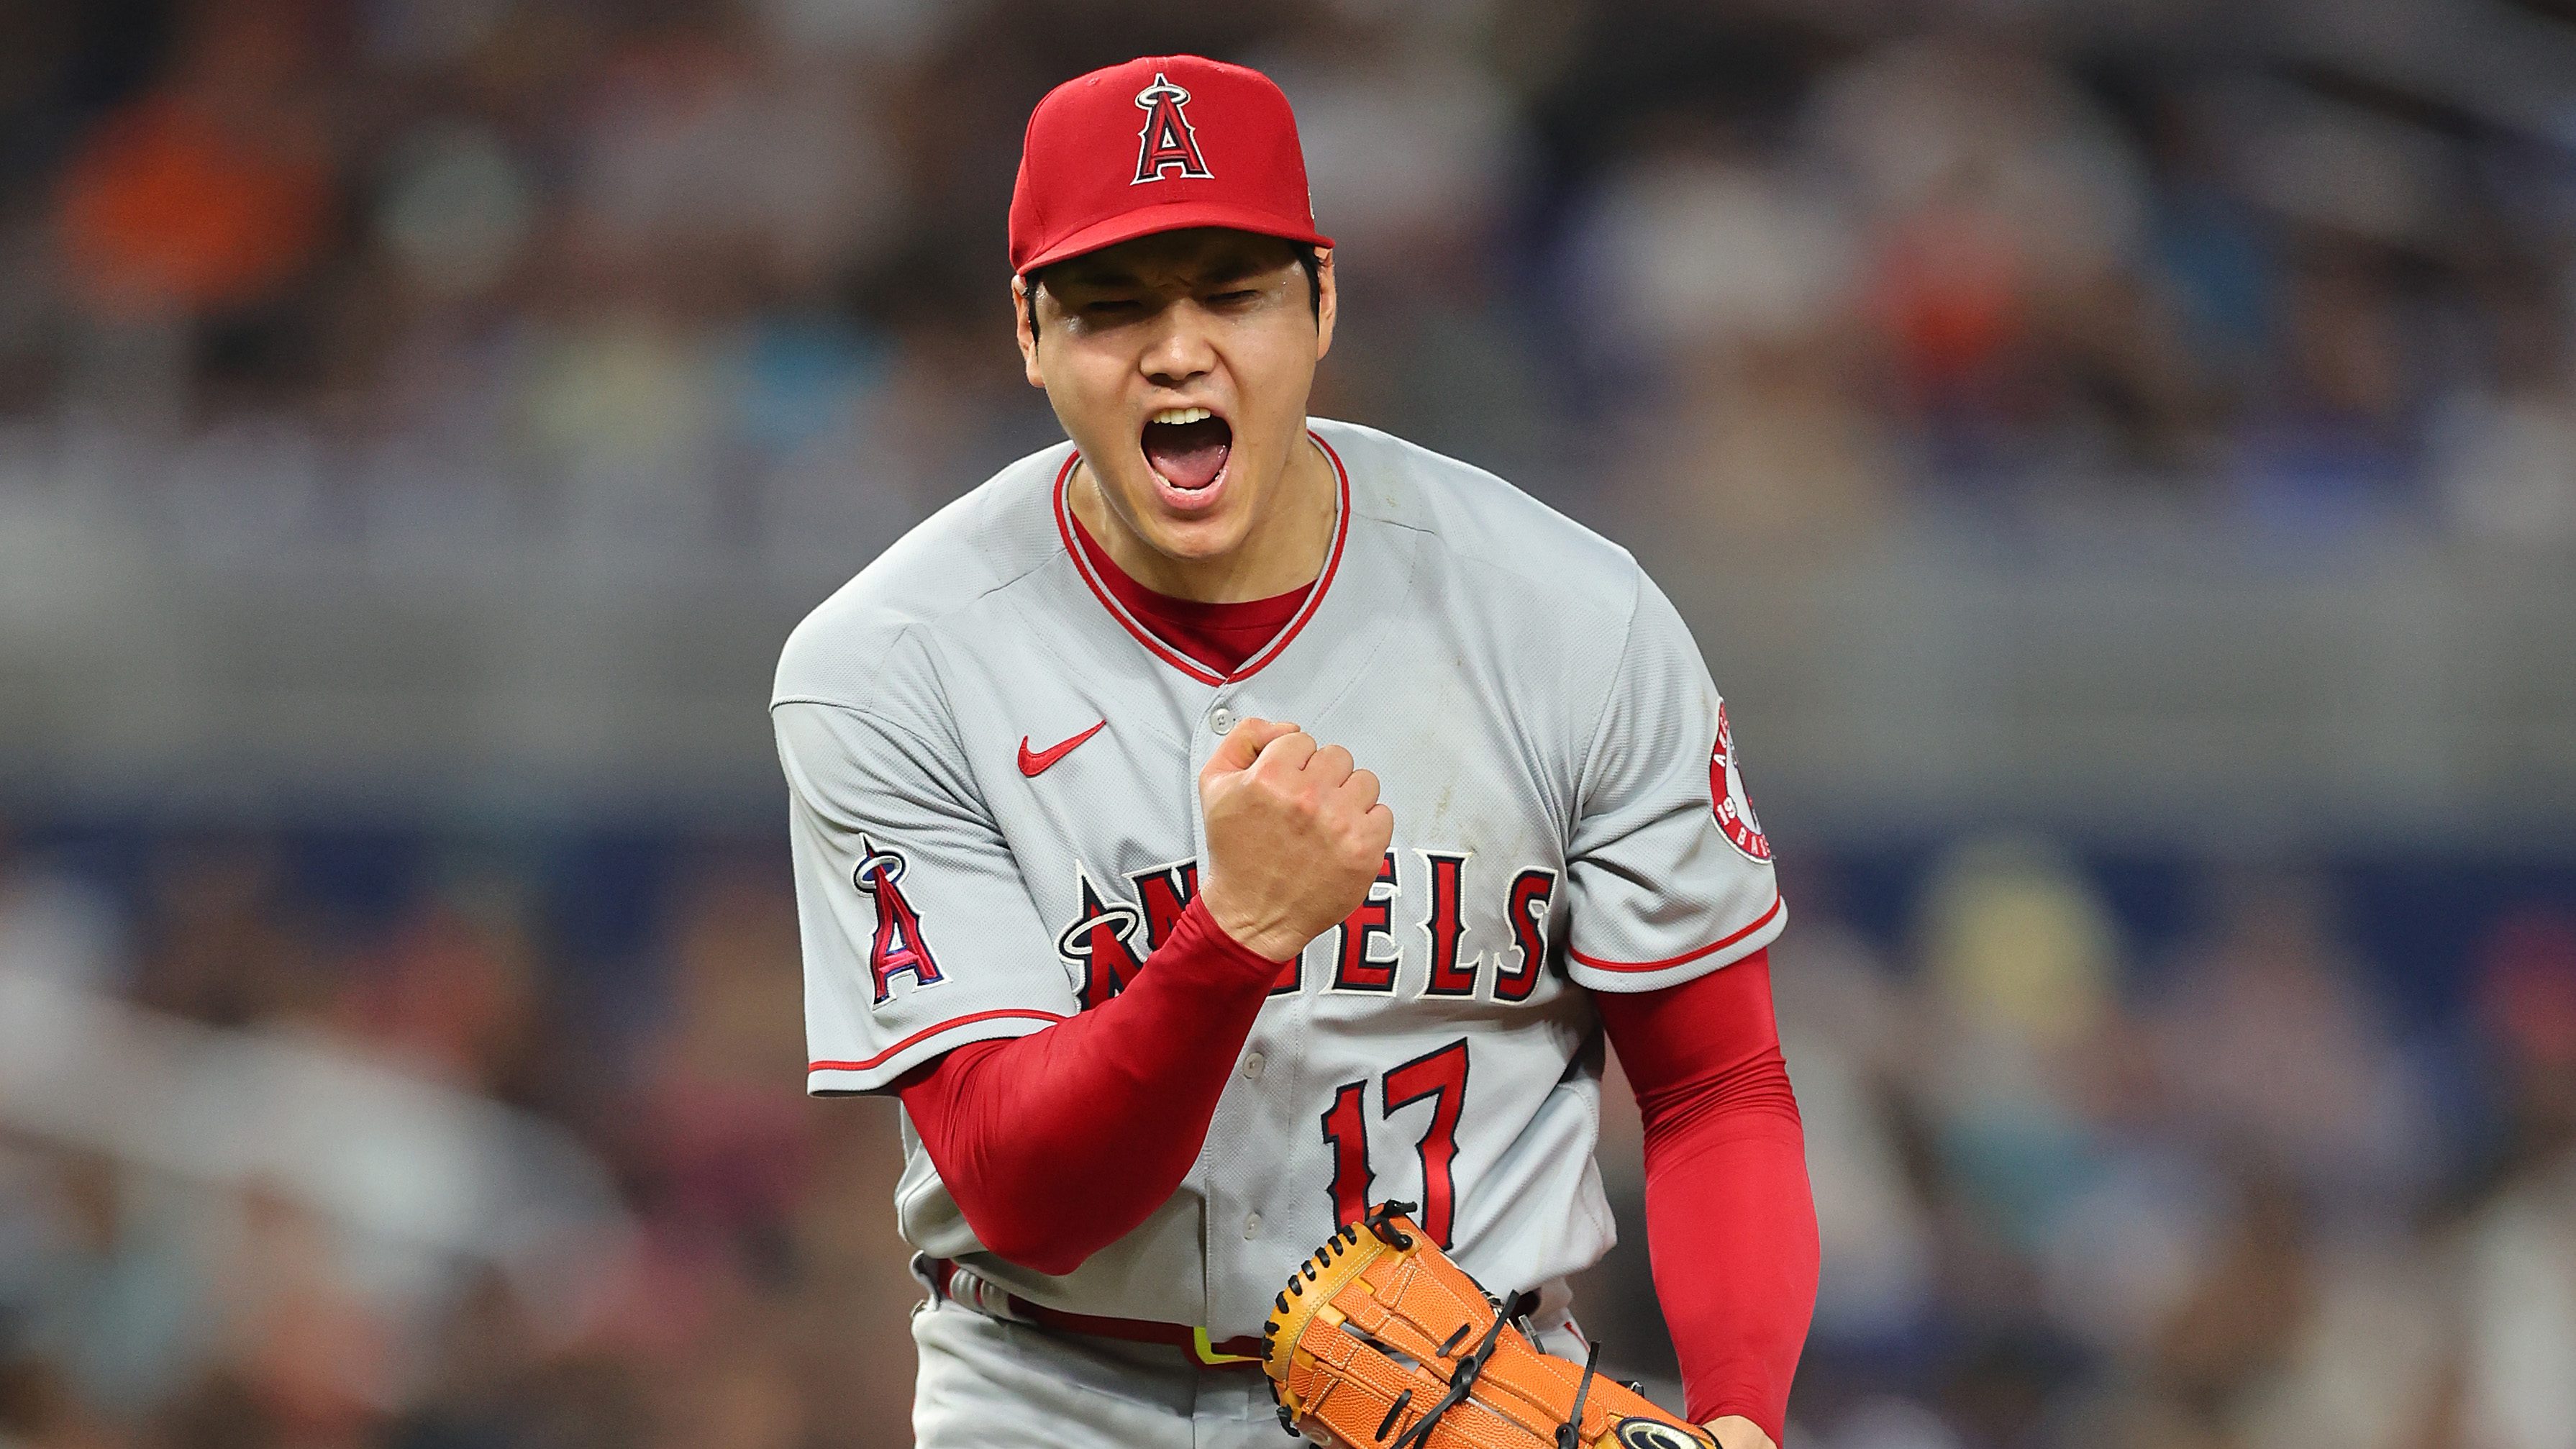 Shohei Ohtani #17 of the Los Angeles Angels celebrates a strikeout during the seventh inning against the Miami Marlins at loanDepot park on July 06, 2022 in Miami, Florida. (Photo by Michael Reaves/Getty Images)